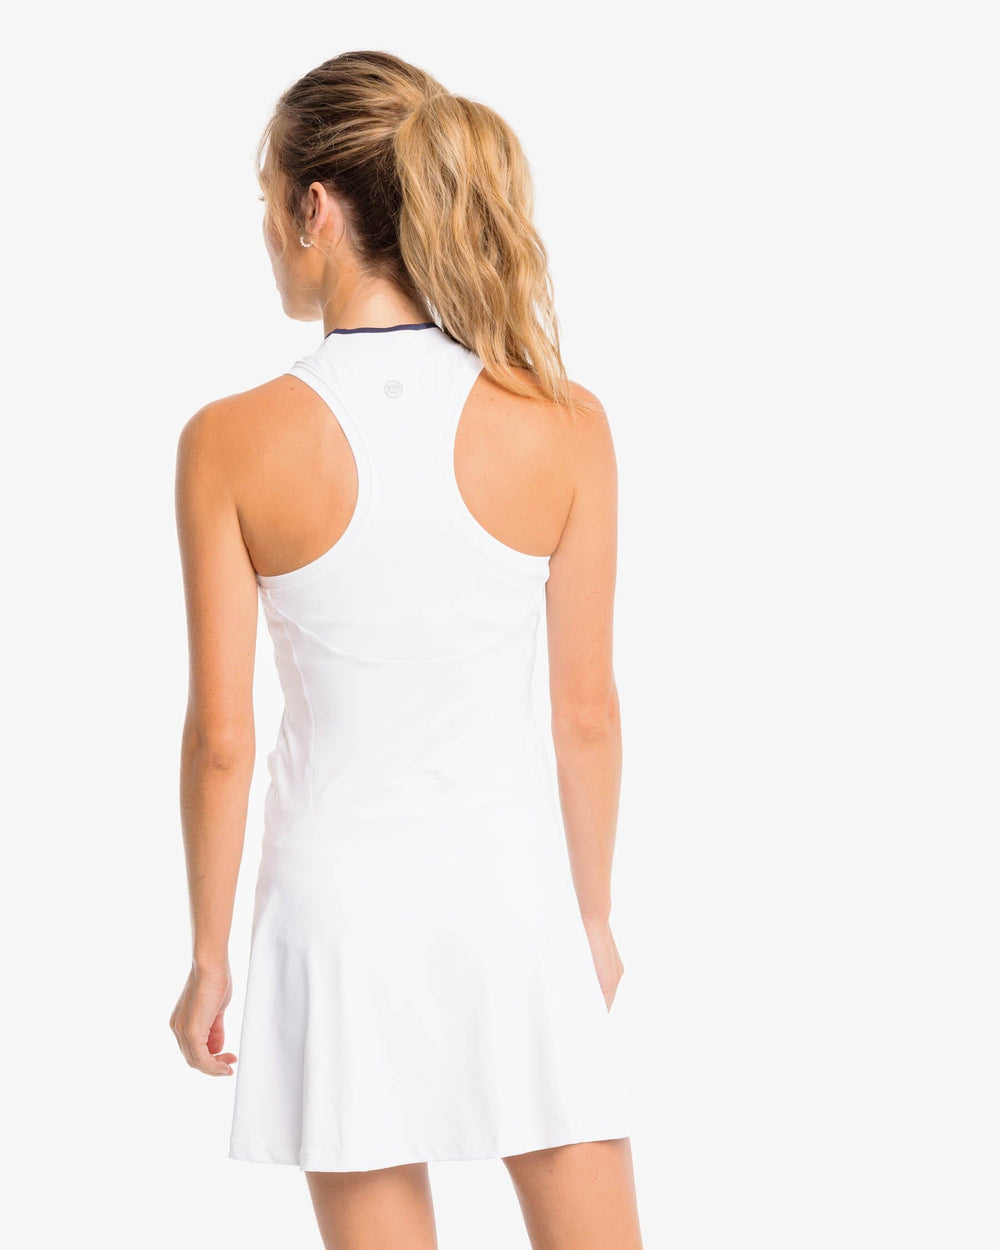 The back view of the Southern Tide Kristy Performance Dress by Southern Tide - Classic White